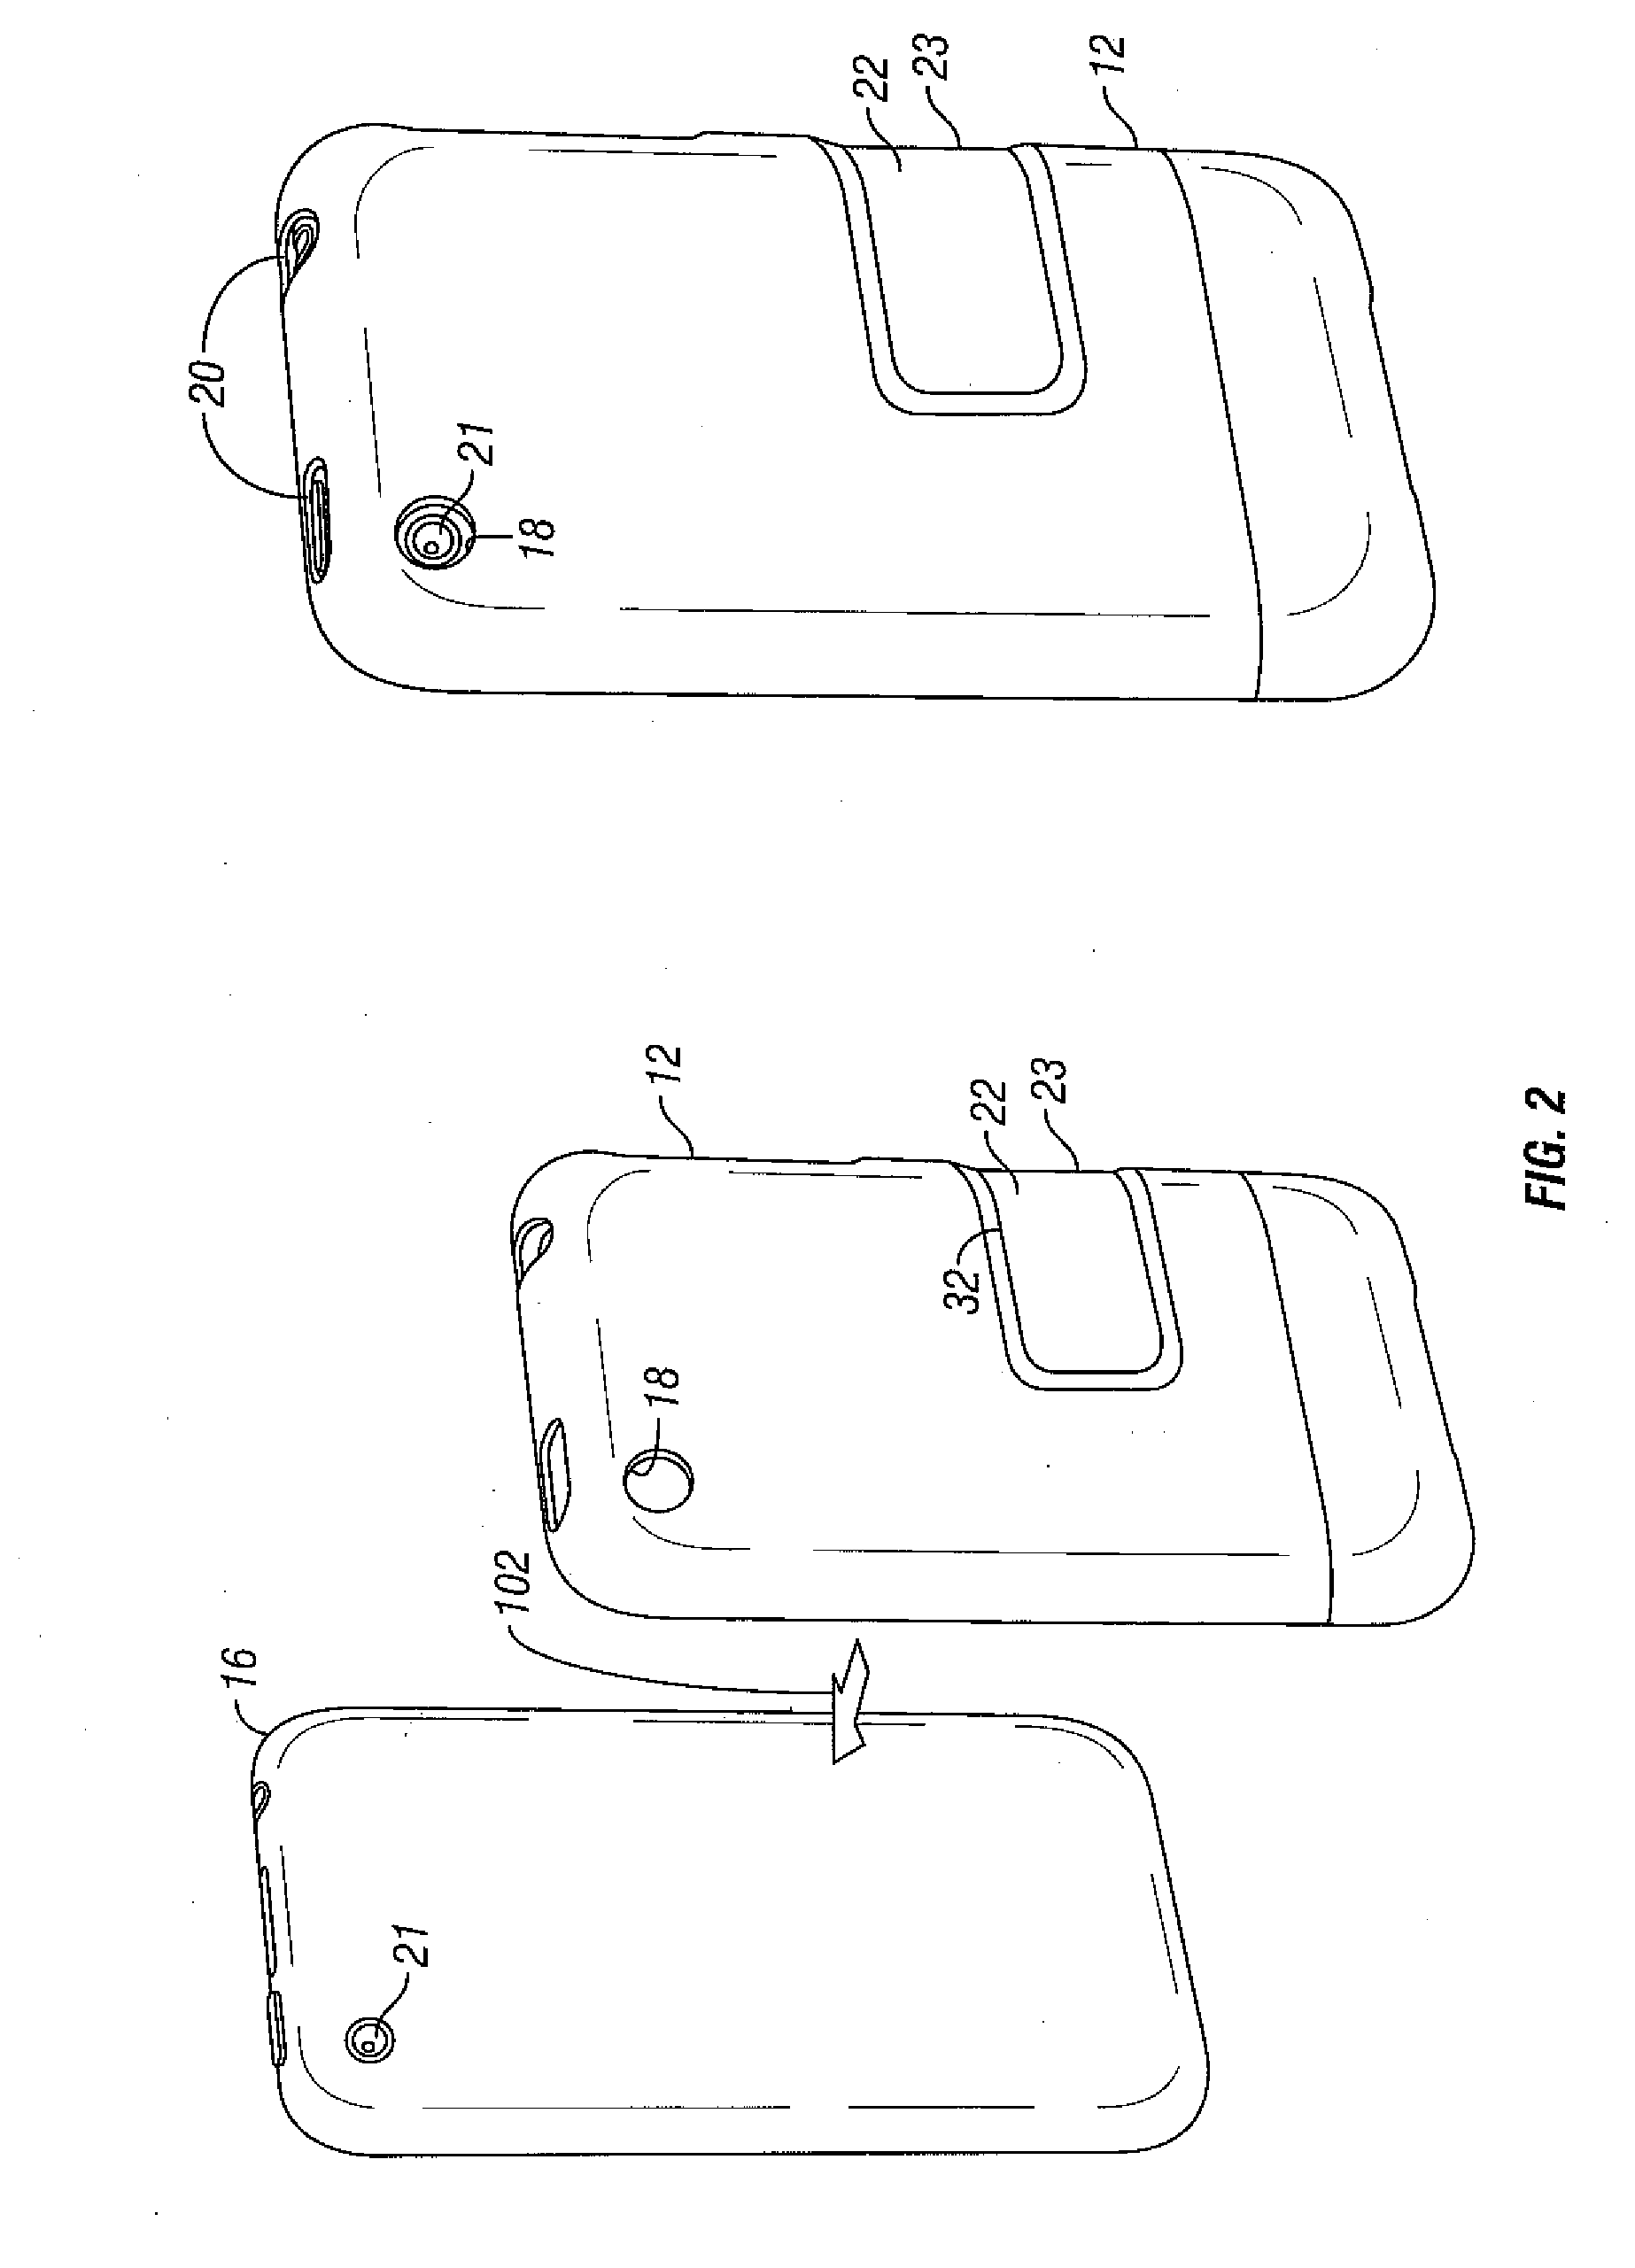 Coupling and accessory system for electronic devices